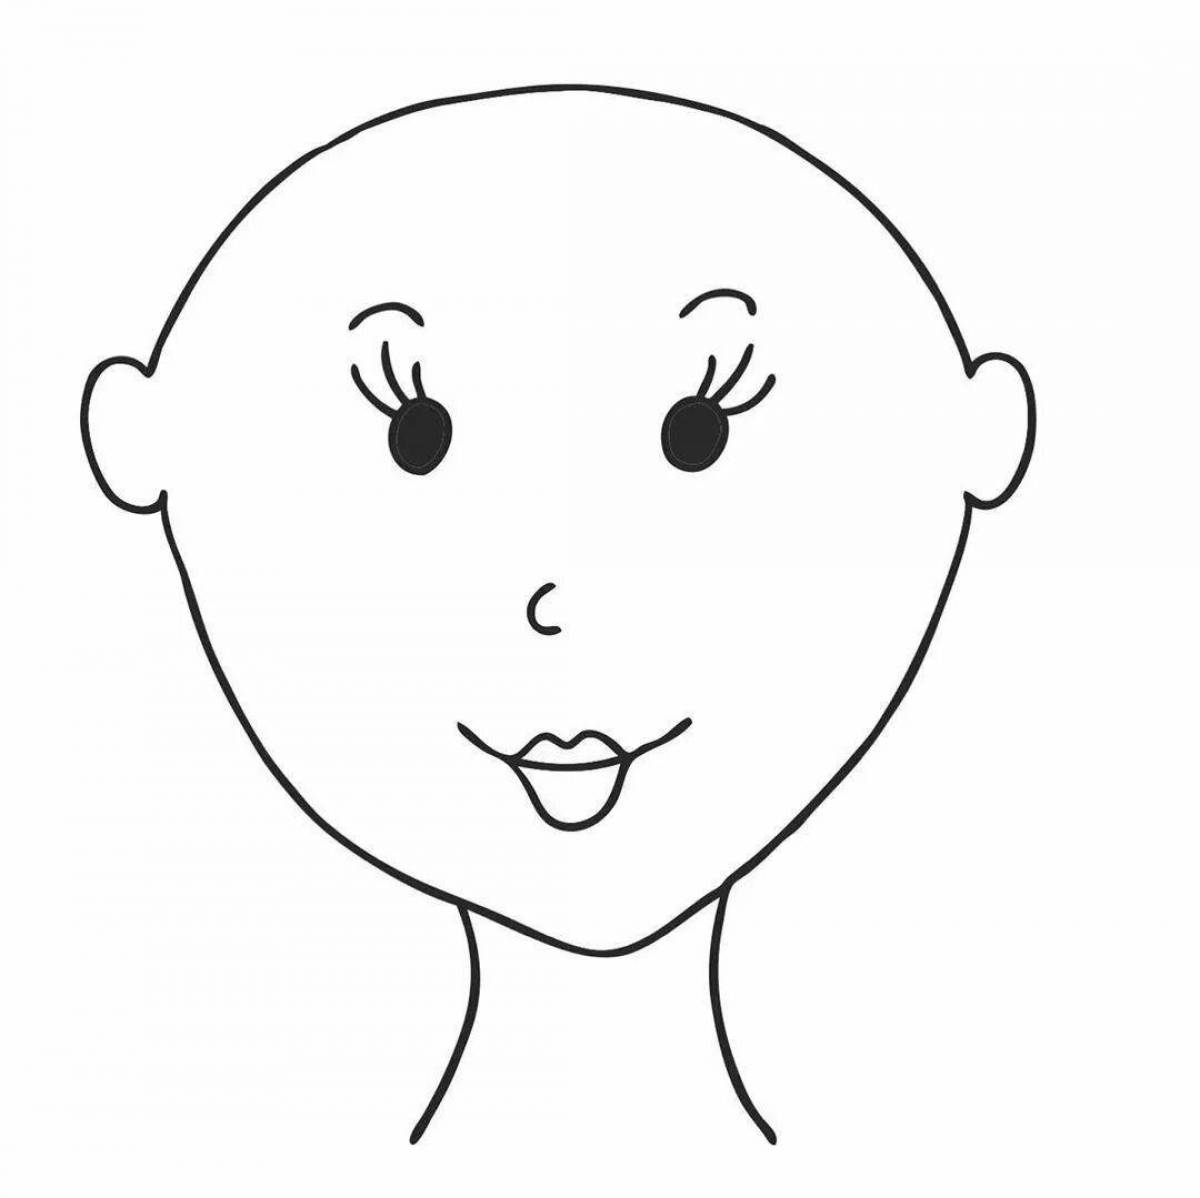 Magic face coloring without hair for kids